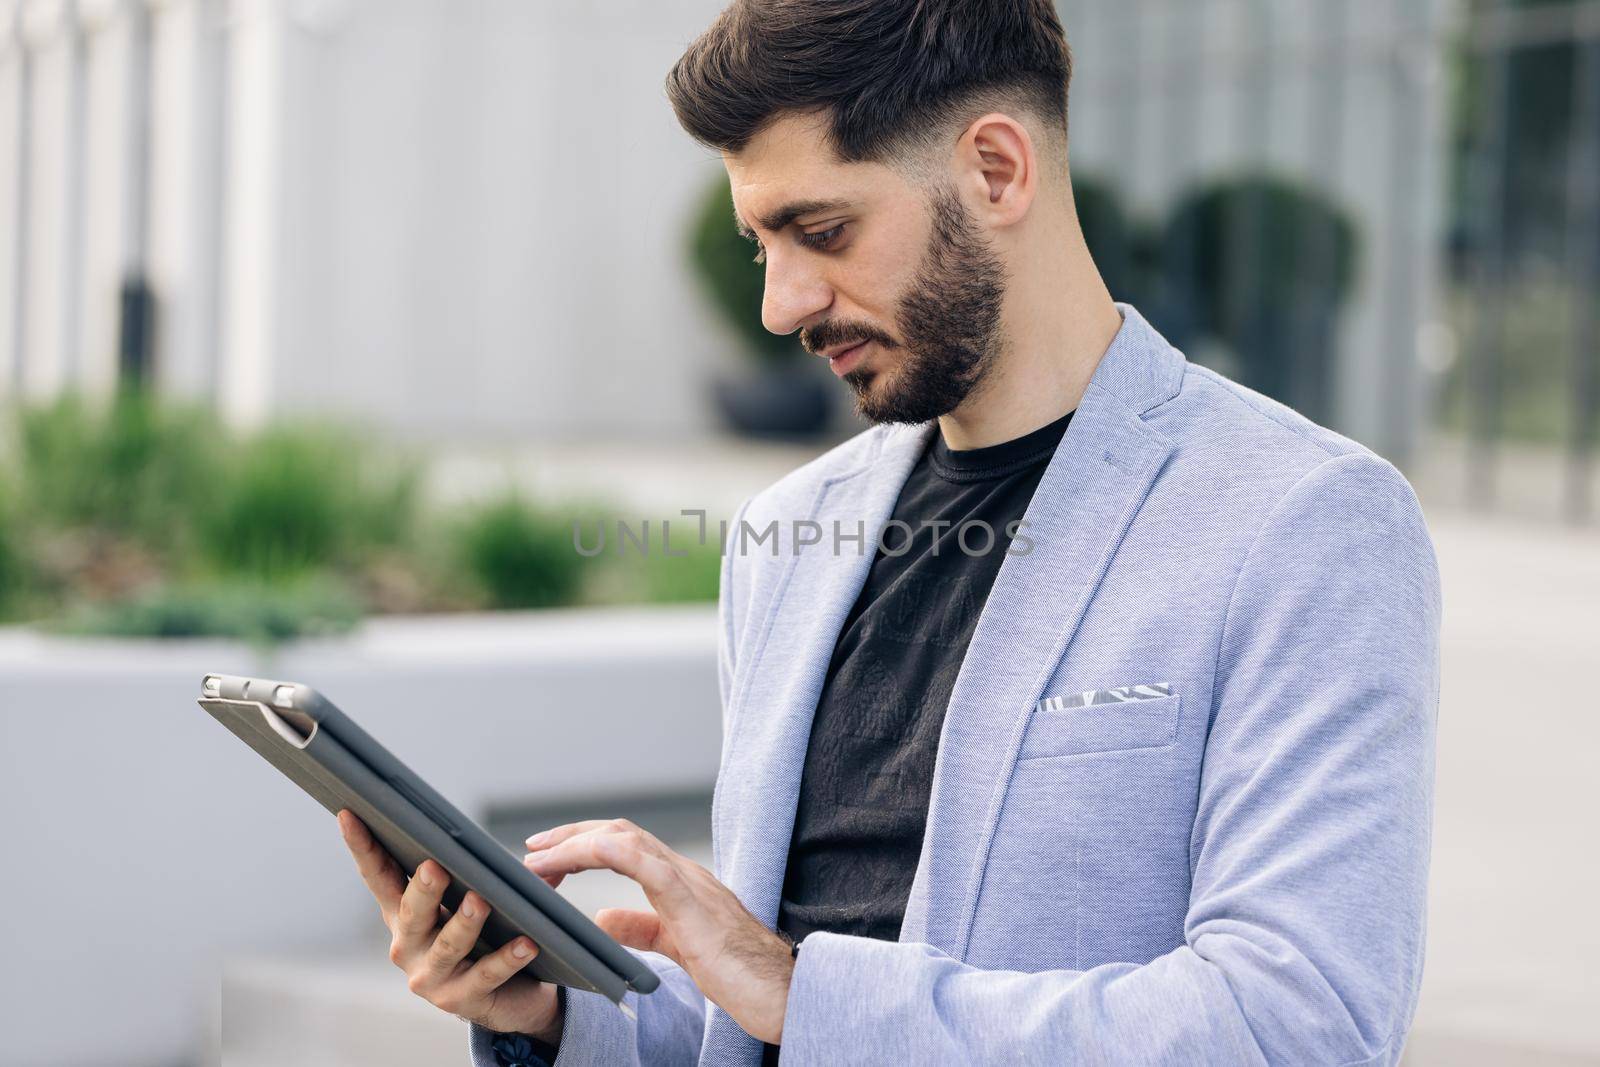 Elegant male chatting online with digital device outside. Businessman holding tablet in hands using business apps on tablet computer. Happy face looking tablet screen outdoors.